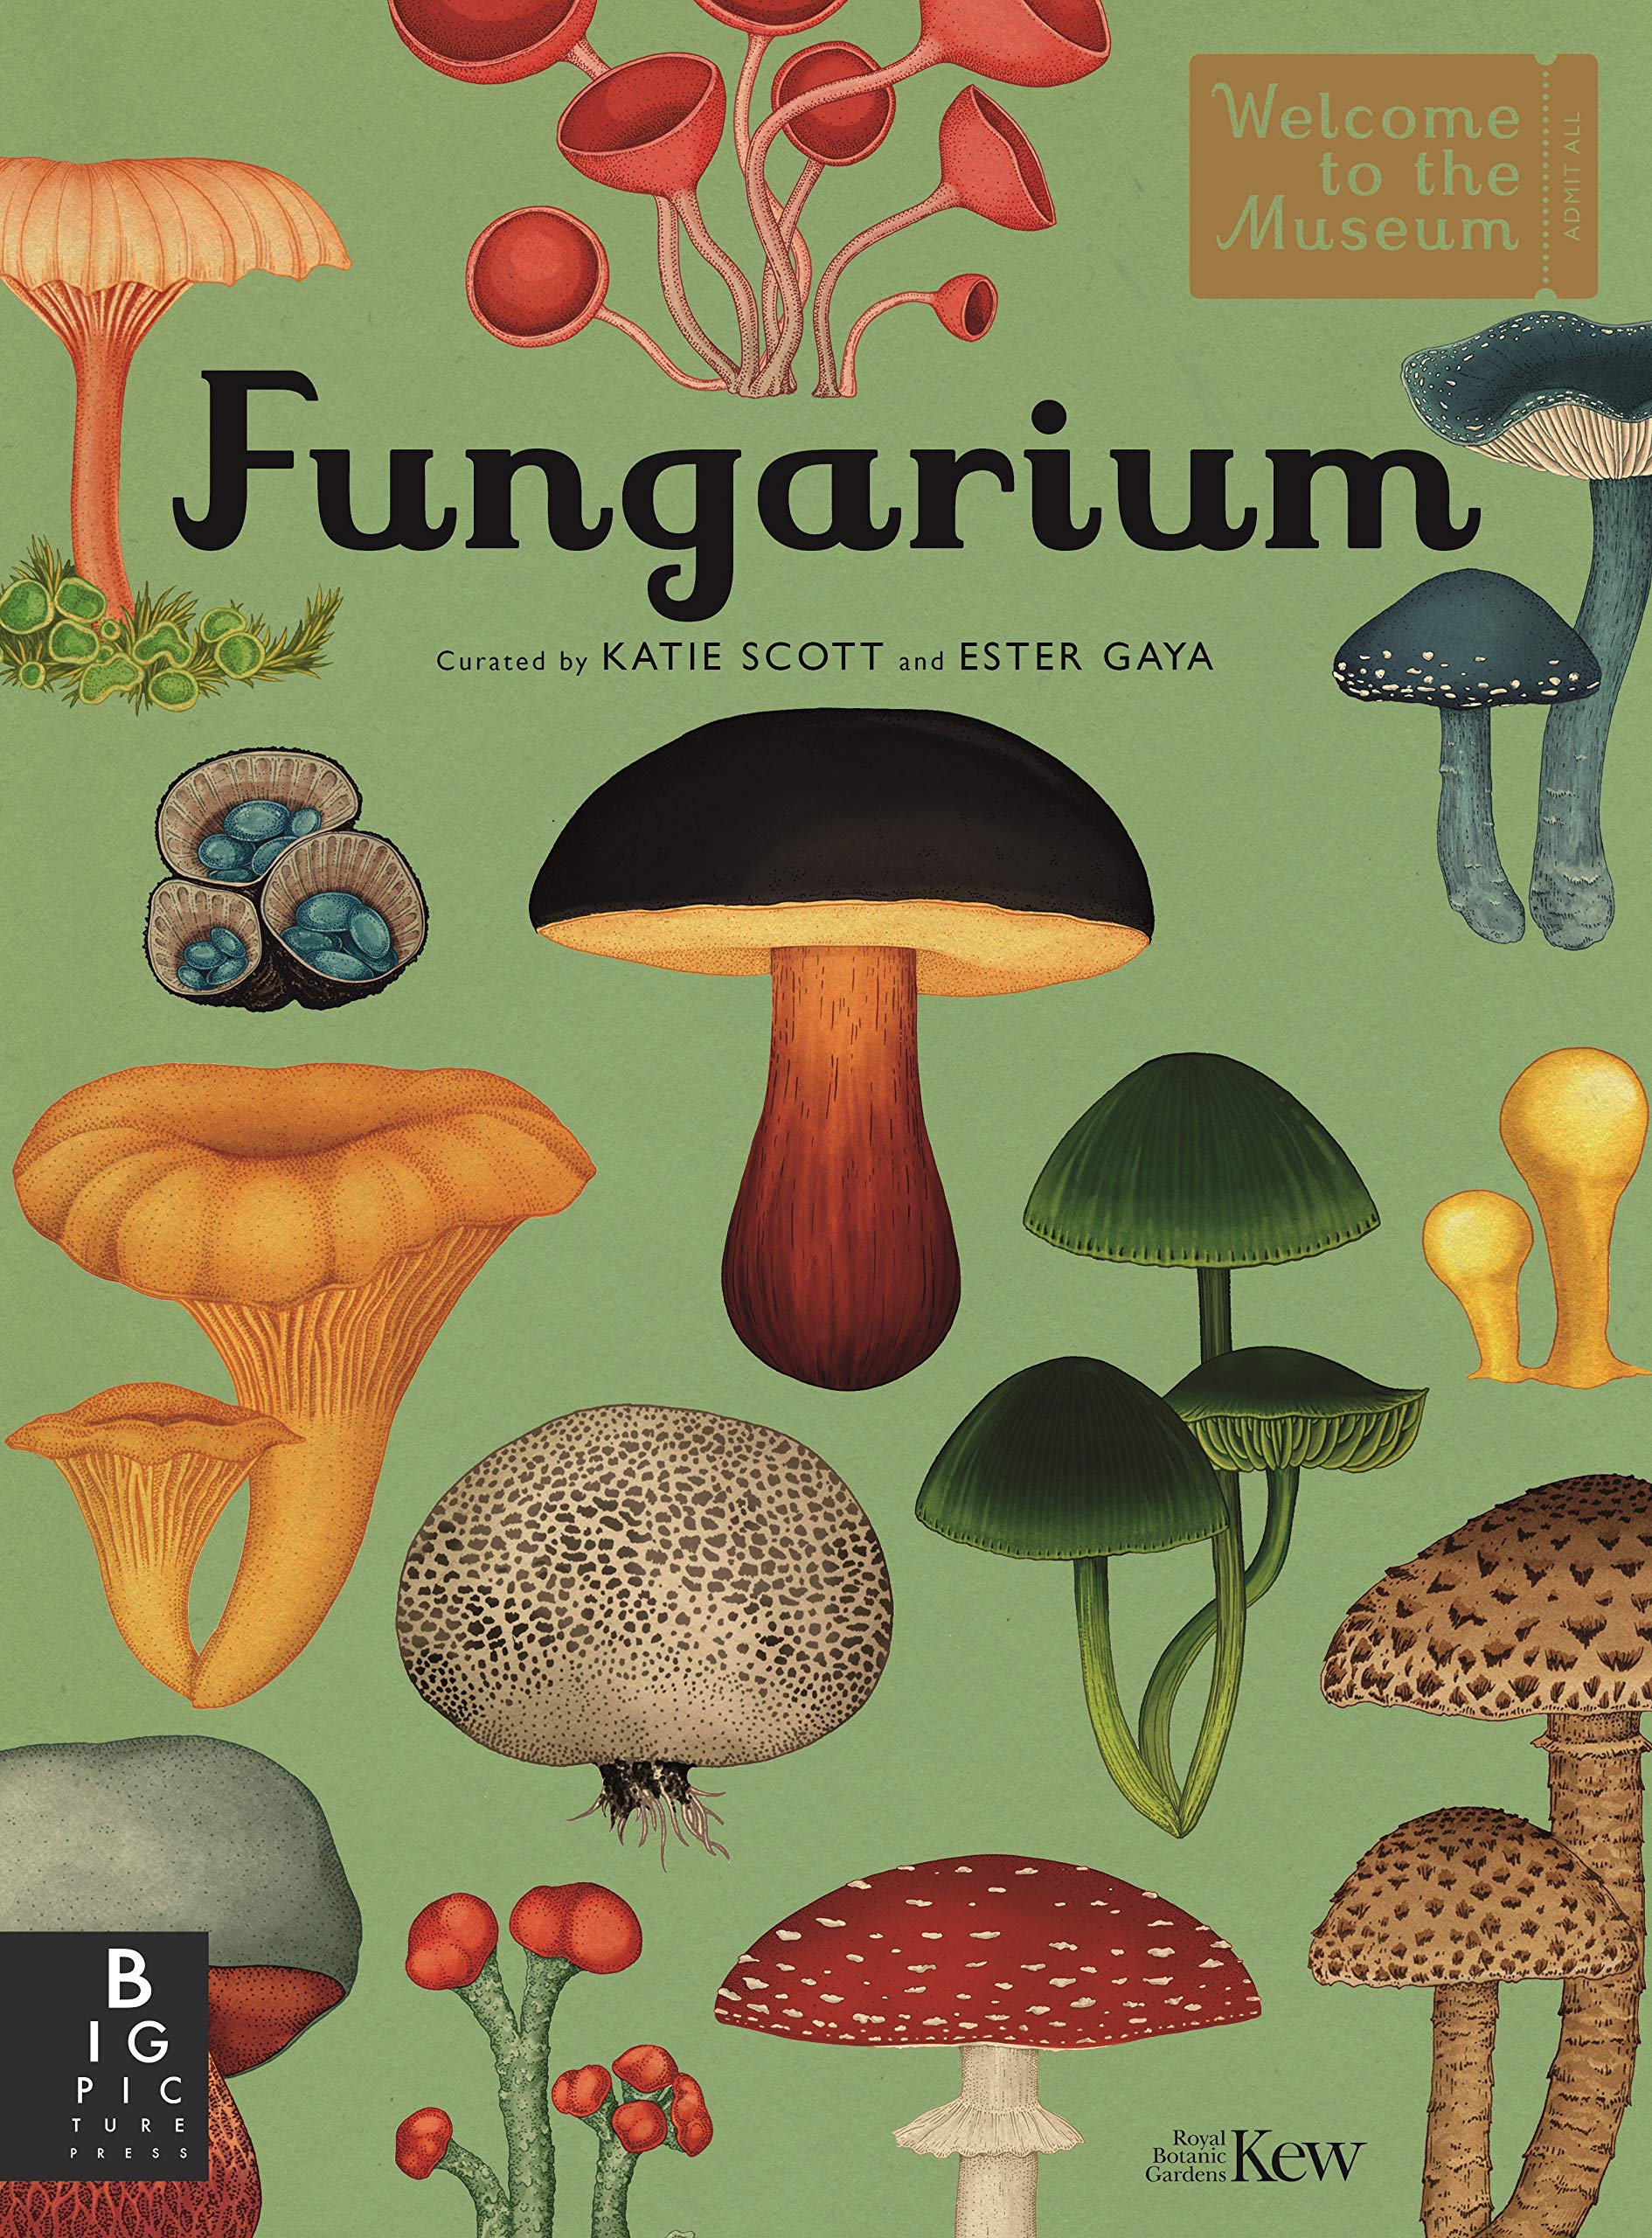 MycoPunks - Fungarium (Welcome To The Museum) Hardcover - Book